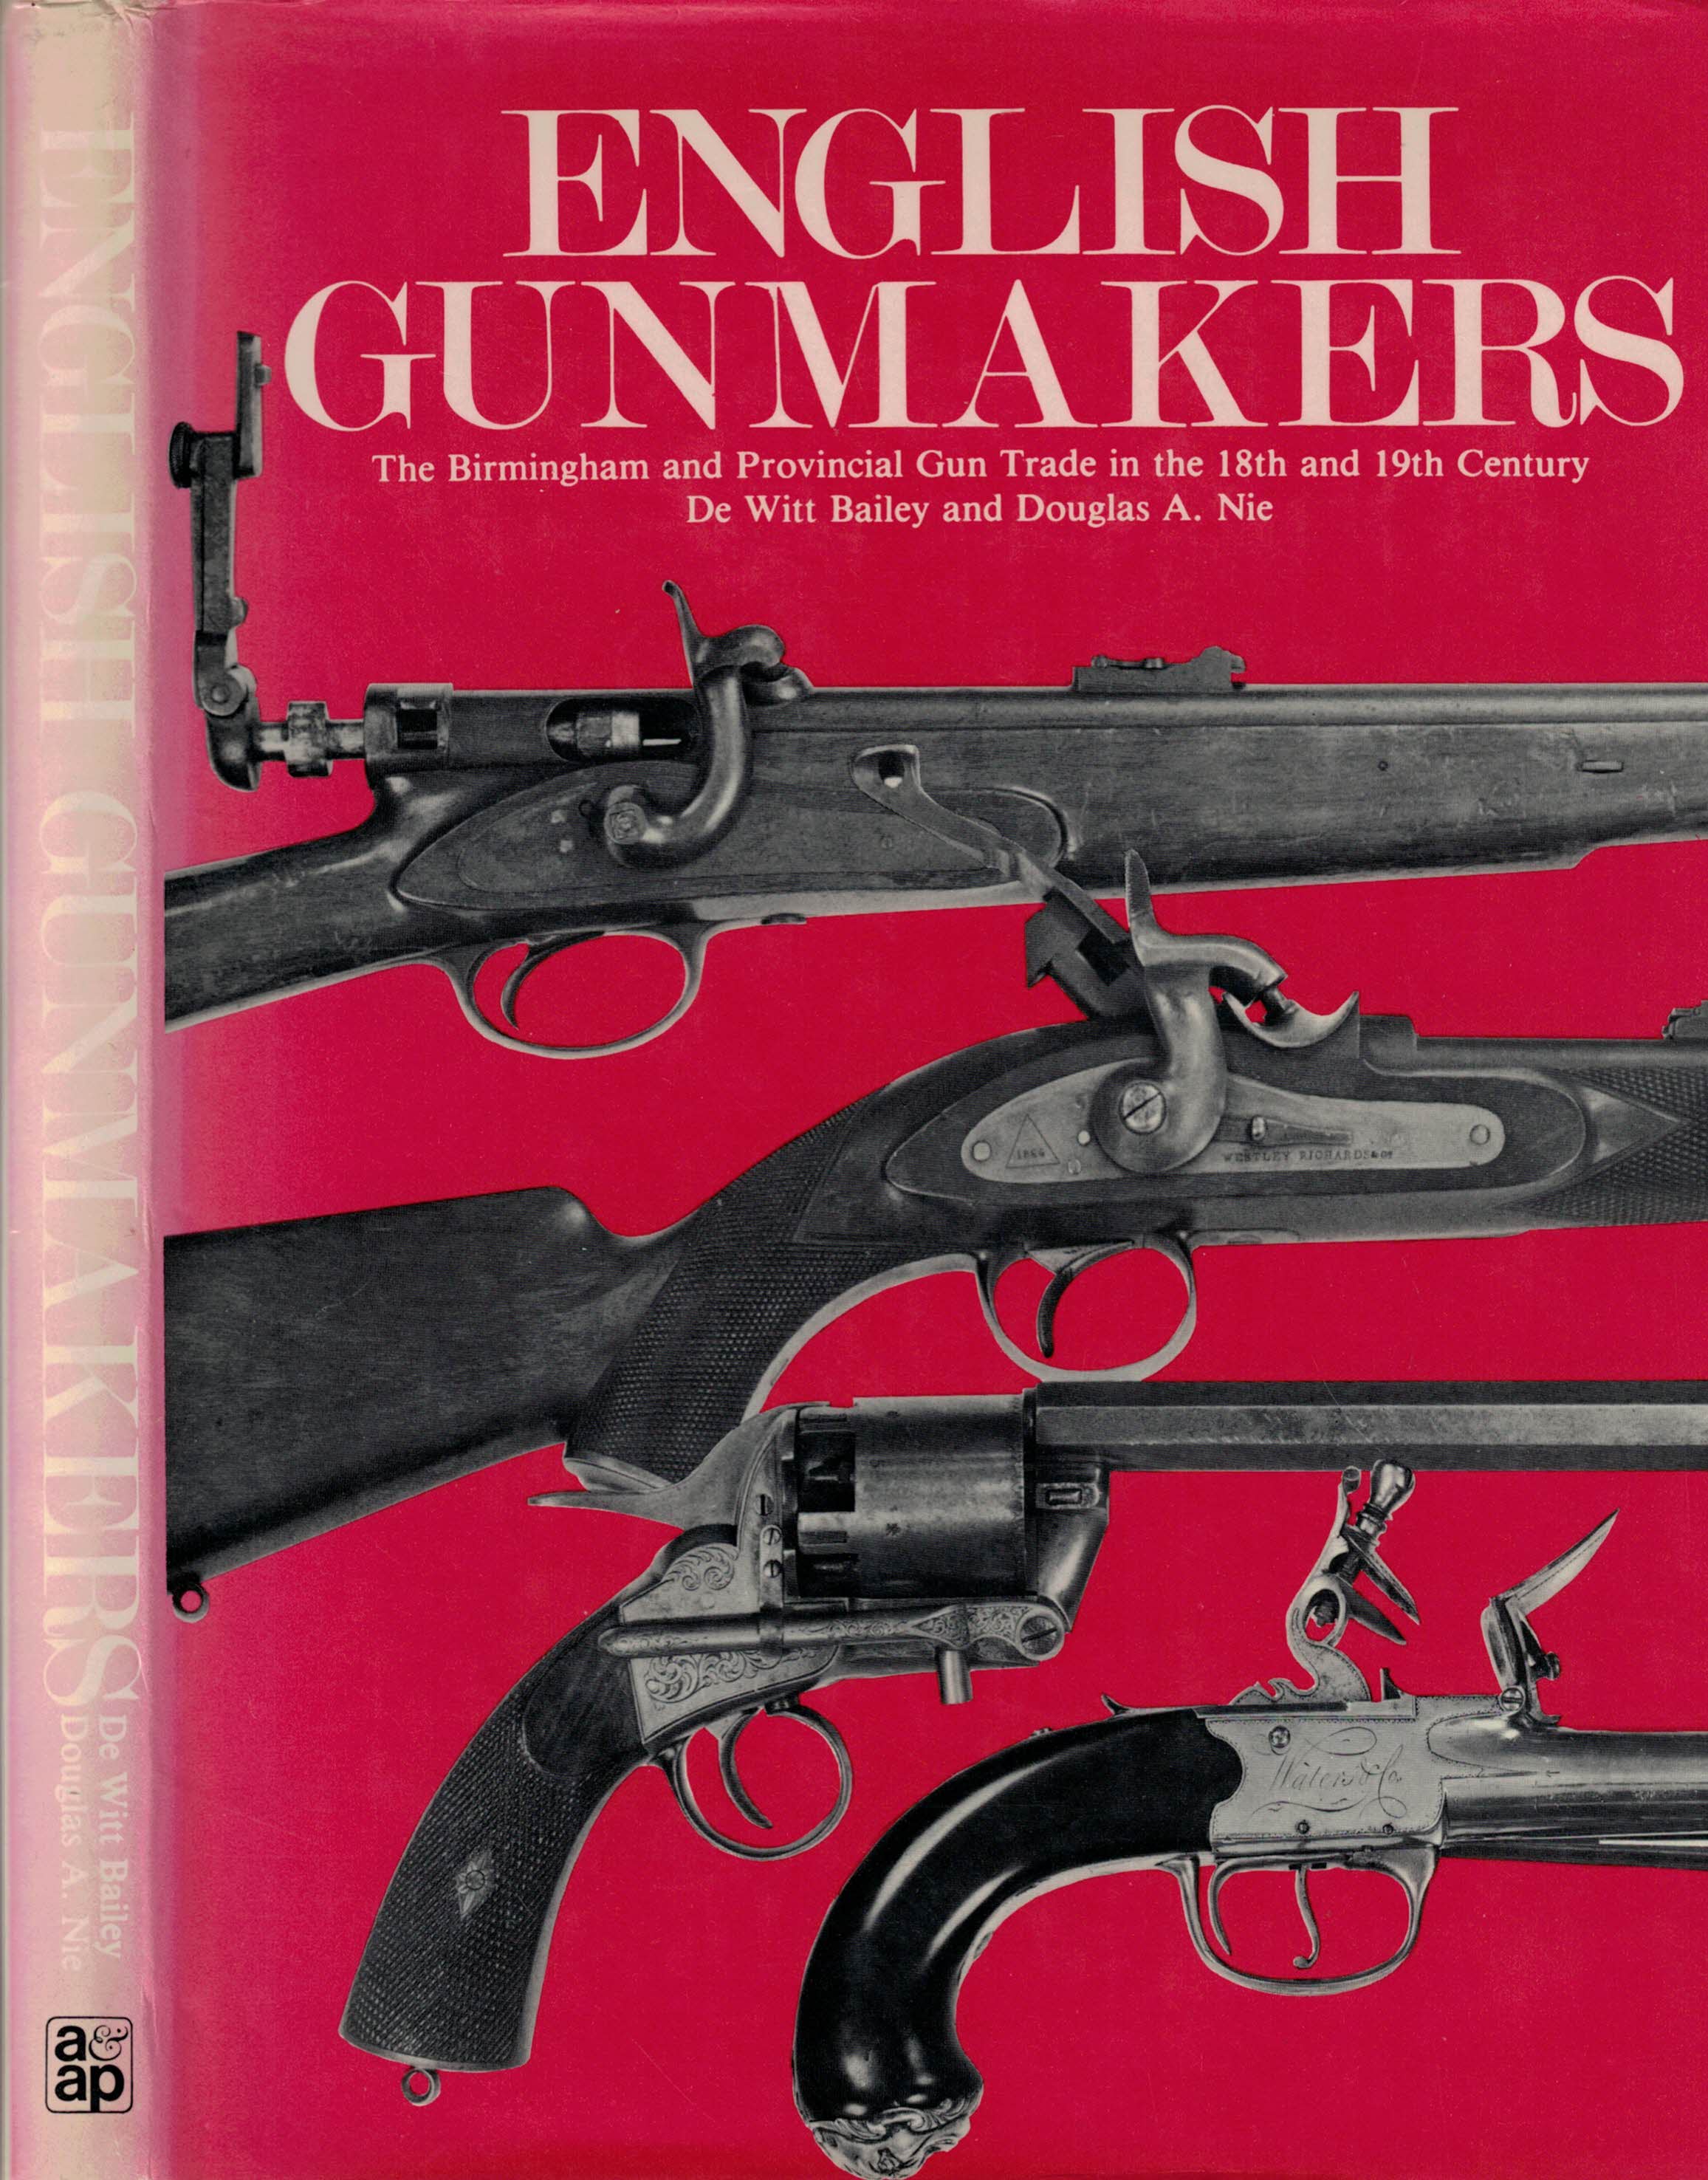 English Gunmakers. The Birmingham and Provincial Gun Trade in the 18th and 19th Century.